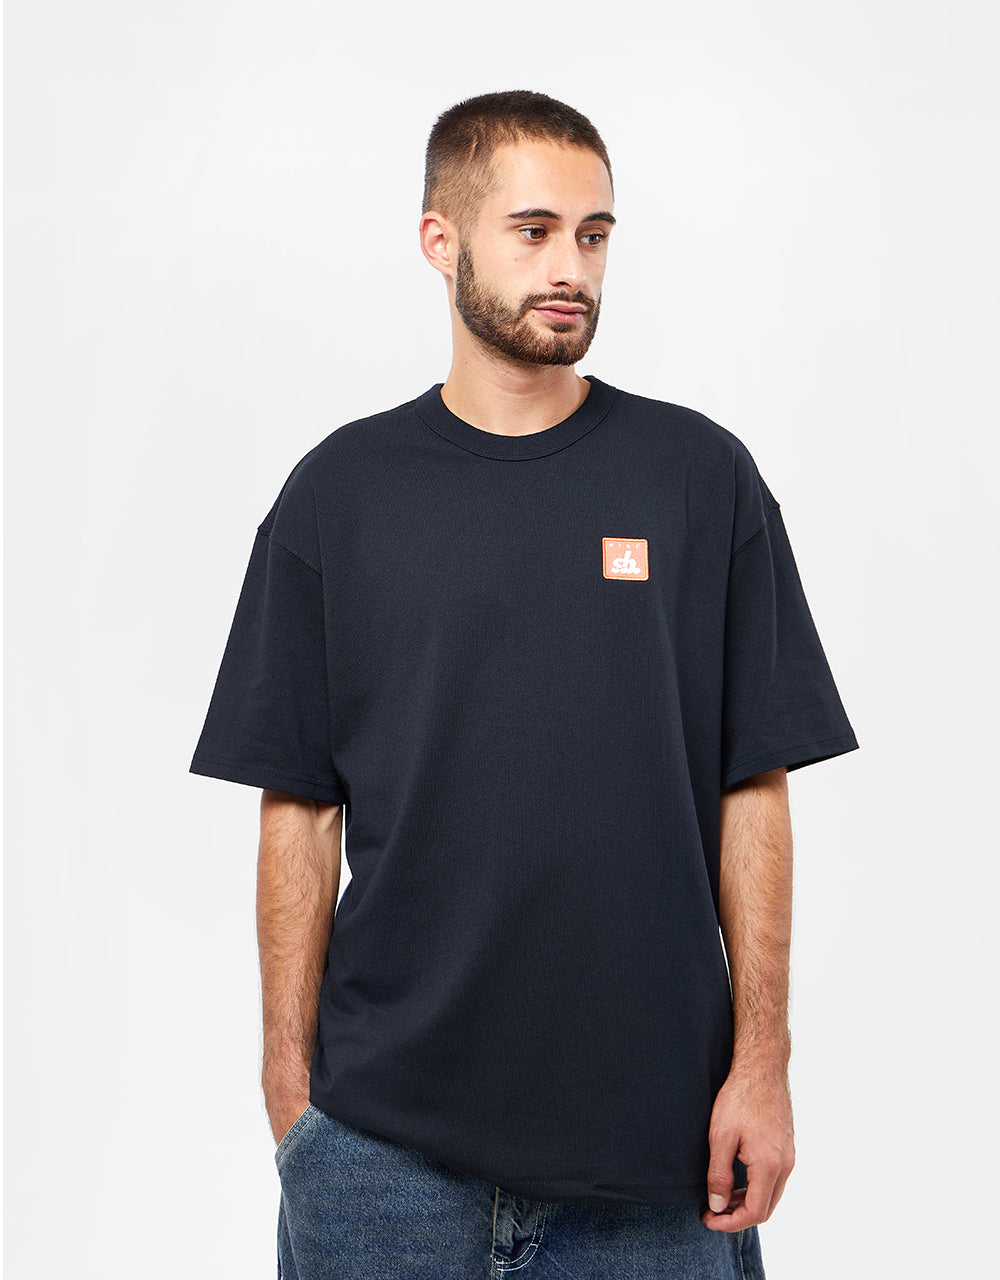 Nike SB Embroidered Patch T-Shirt - Black